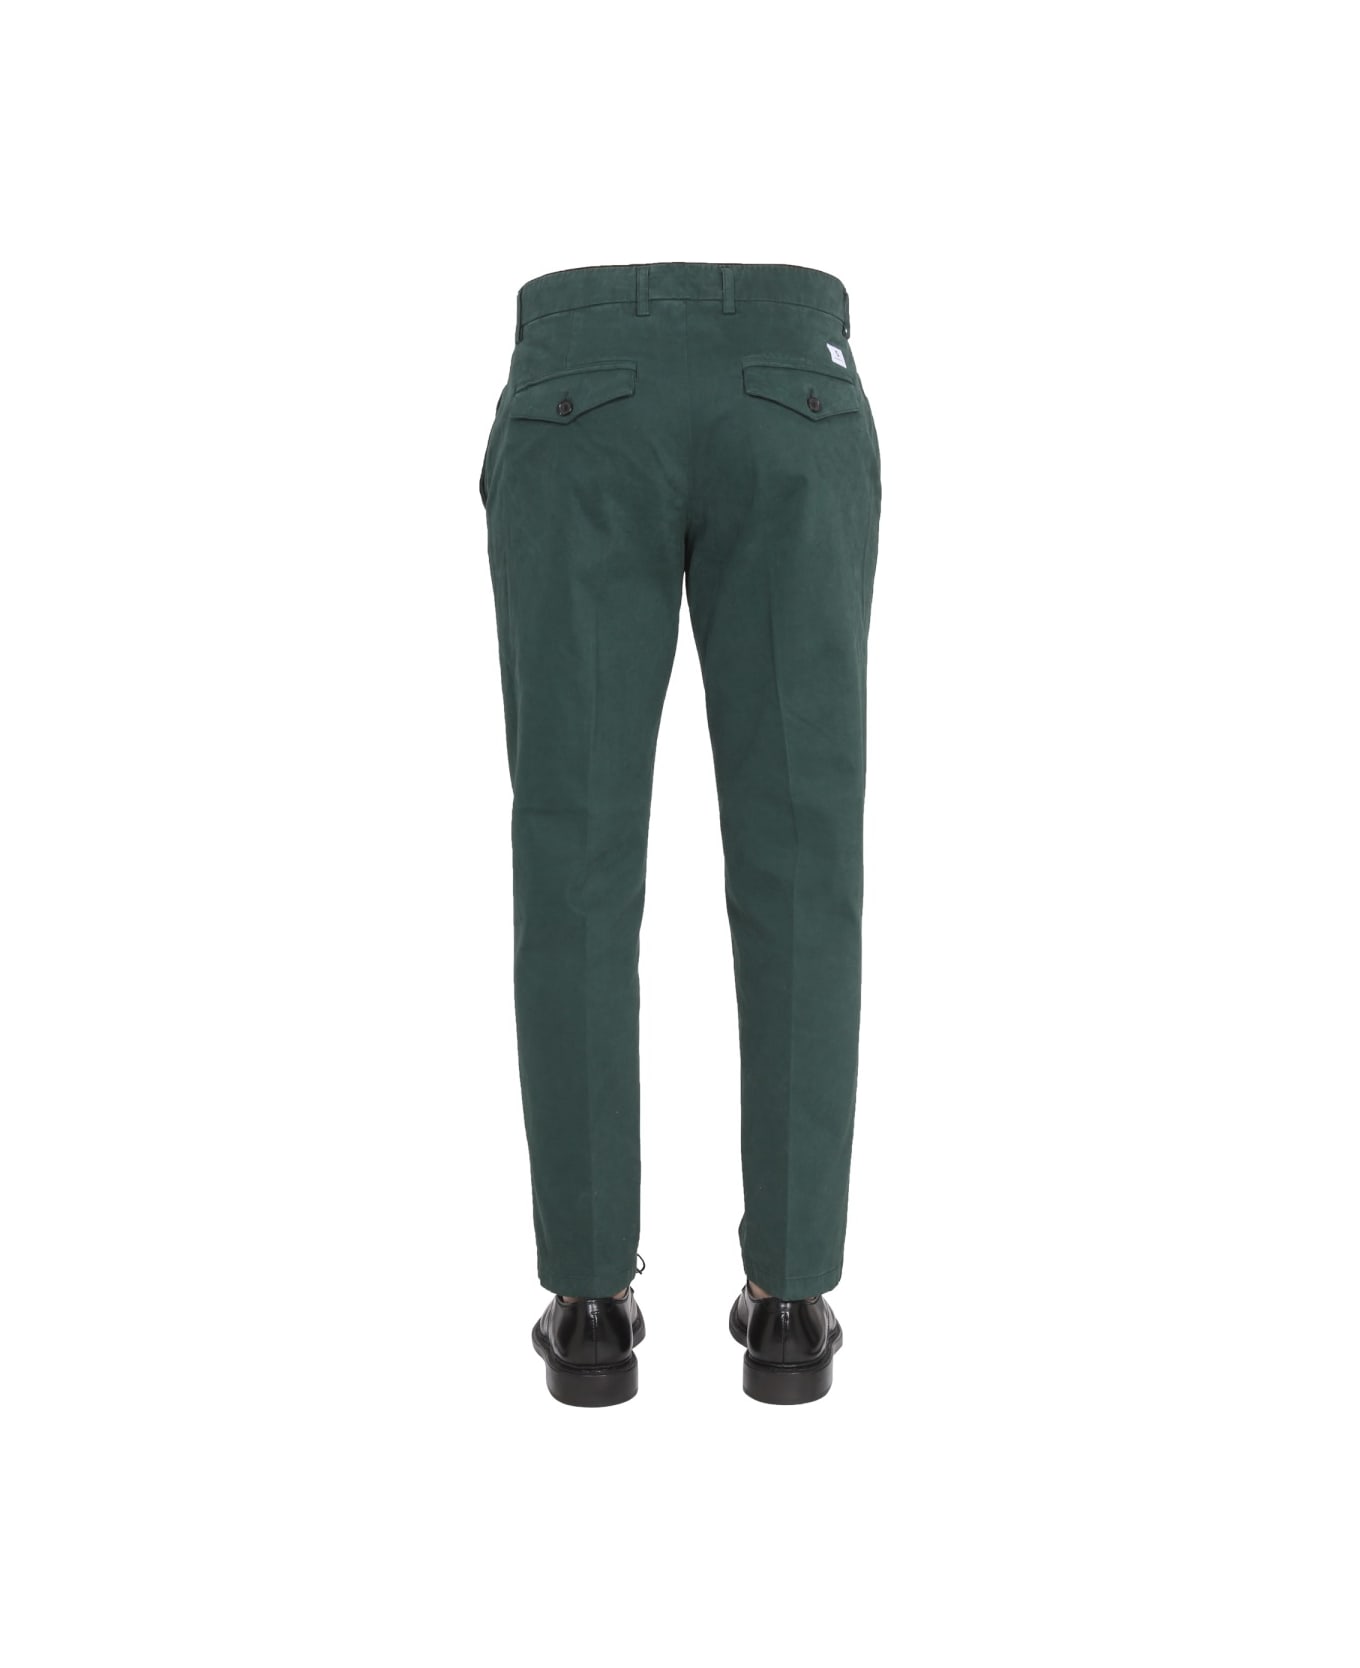 Department Five Setter Chino Pants - GREEN